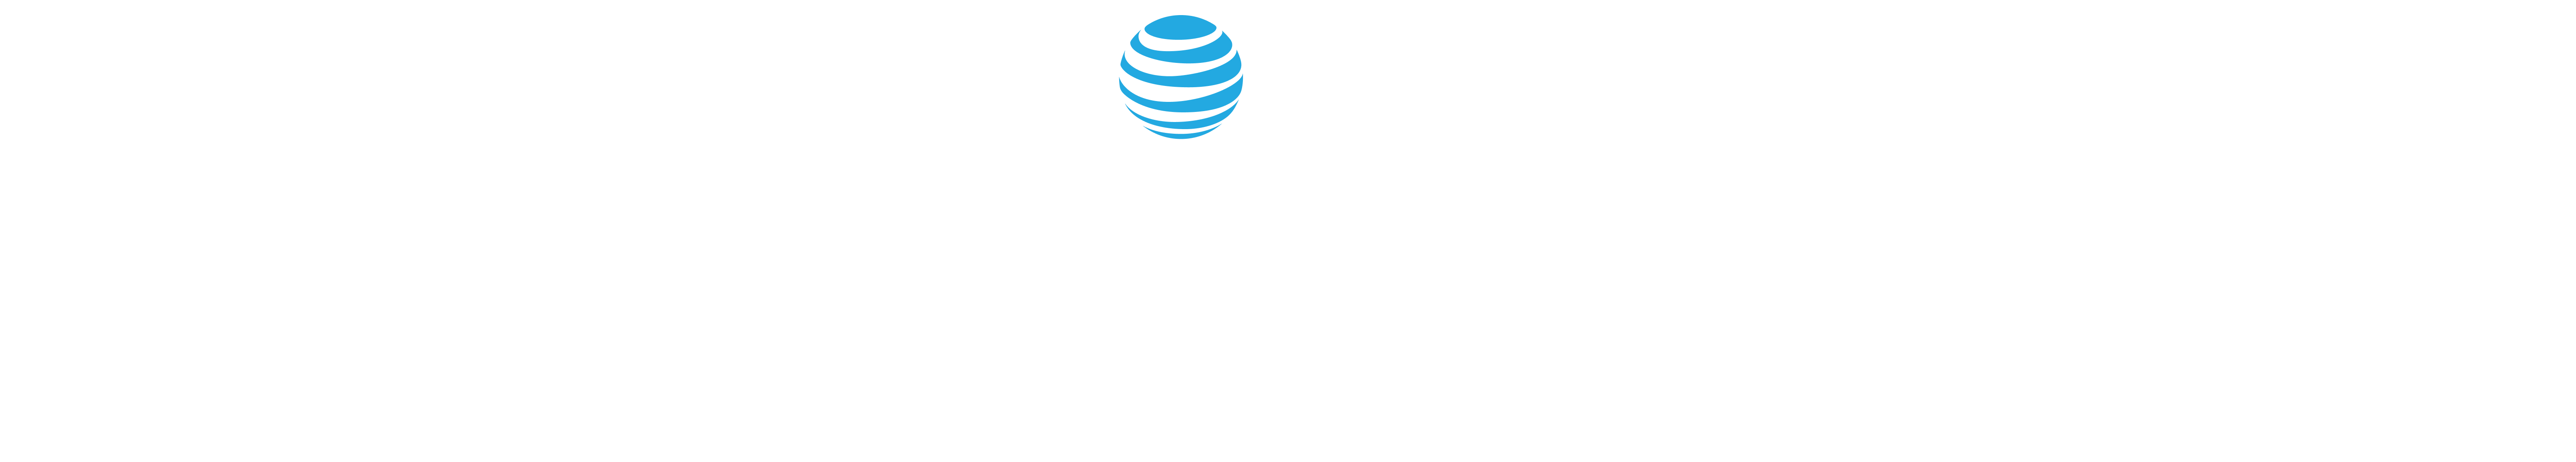 Next Level Network Powered by AT&T Business